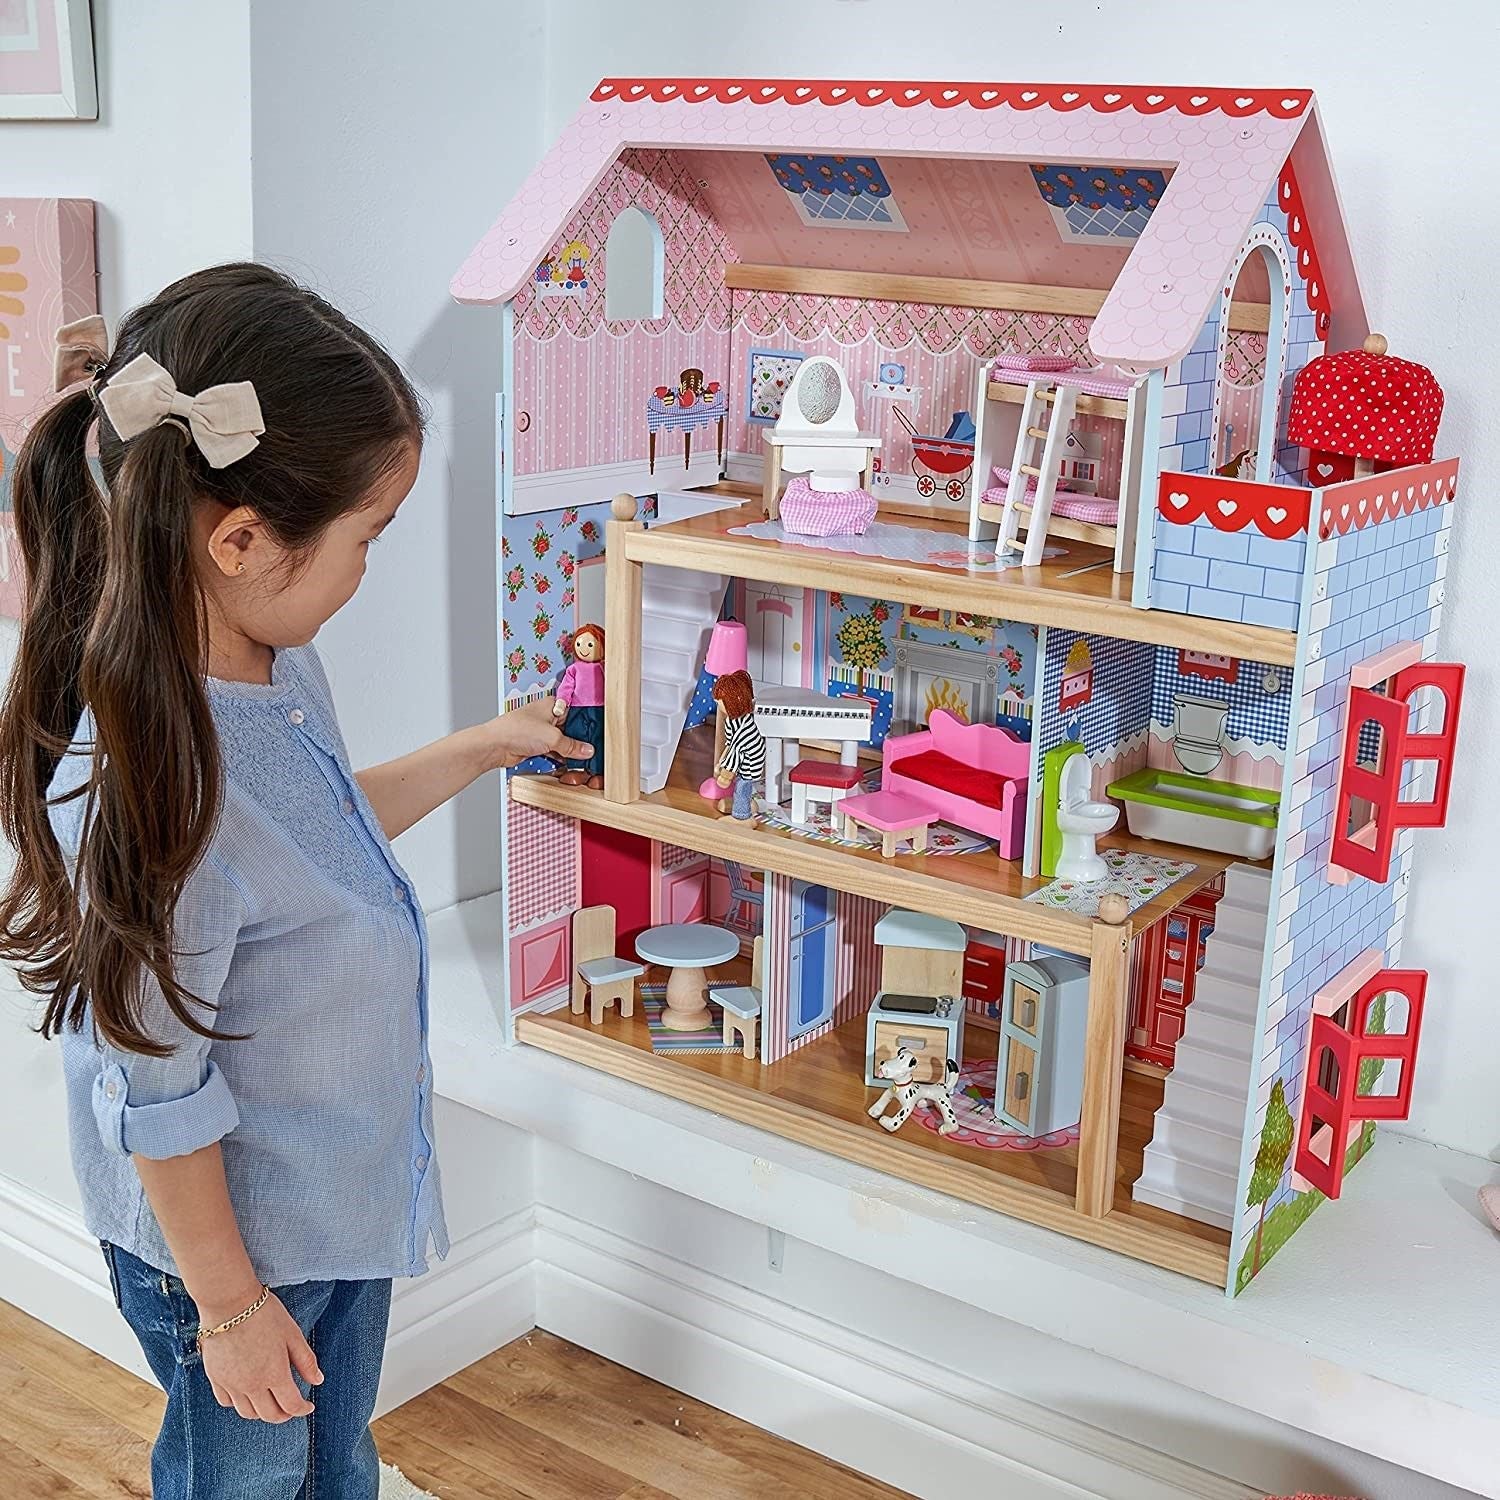 Doll Cottage with Furniture for kids